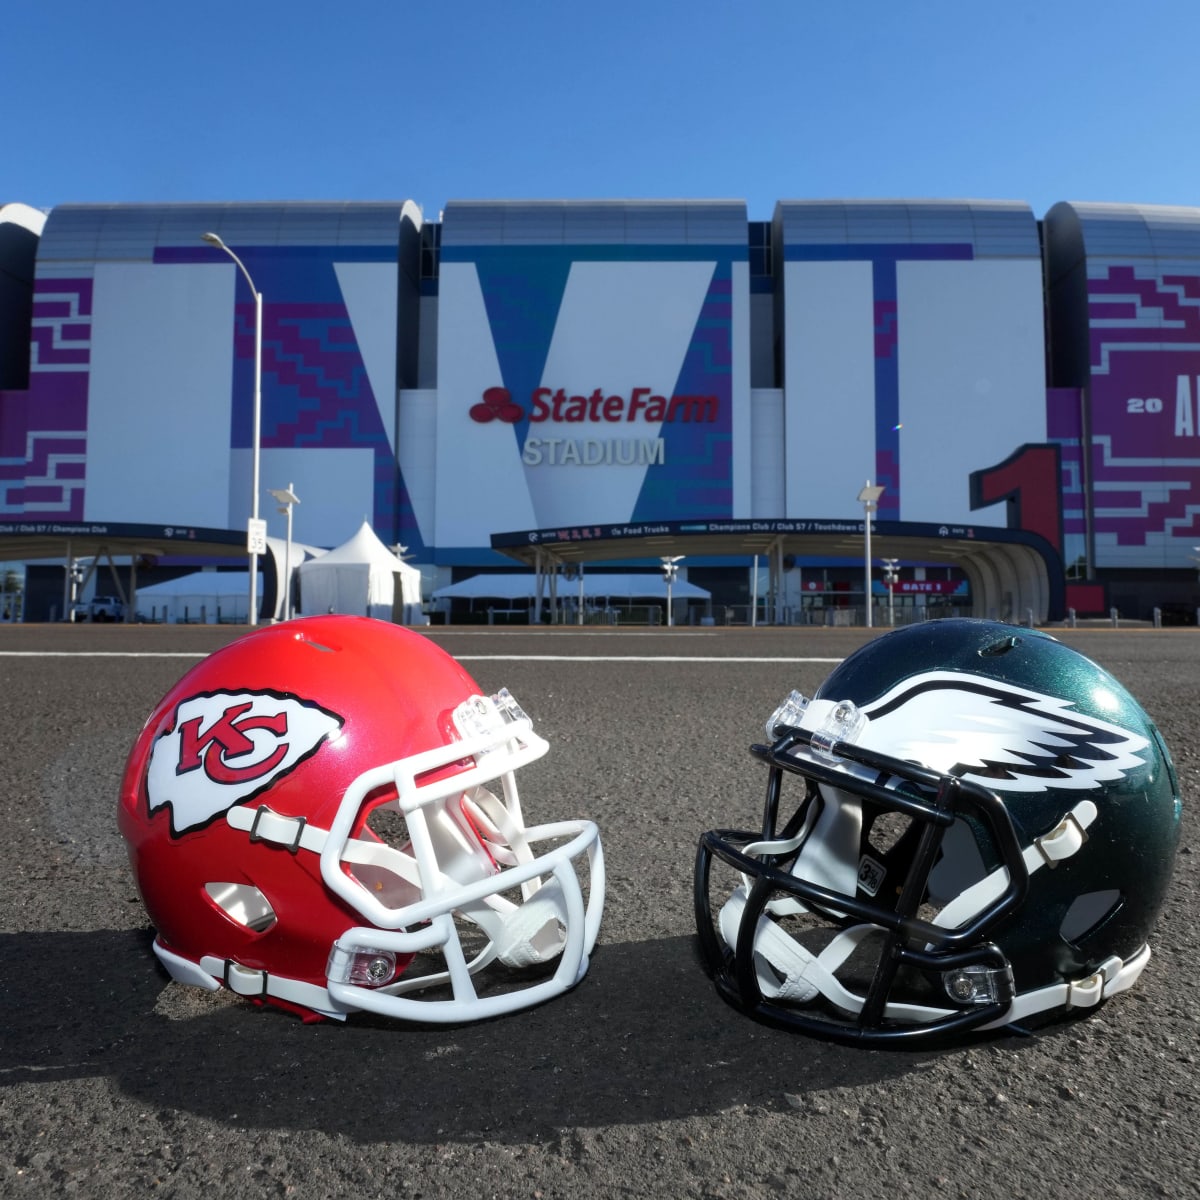 How to buy tickets to Super Bowl 57 in Arizona; What are cheapest seats? 